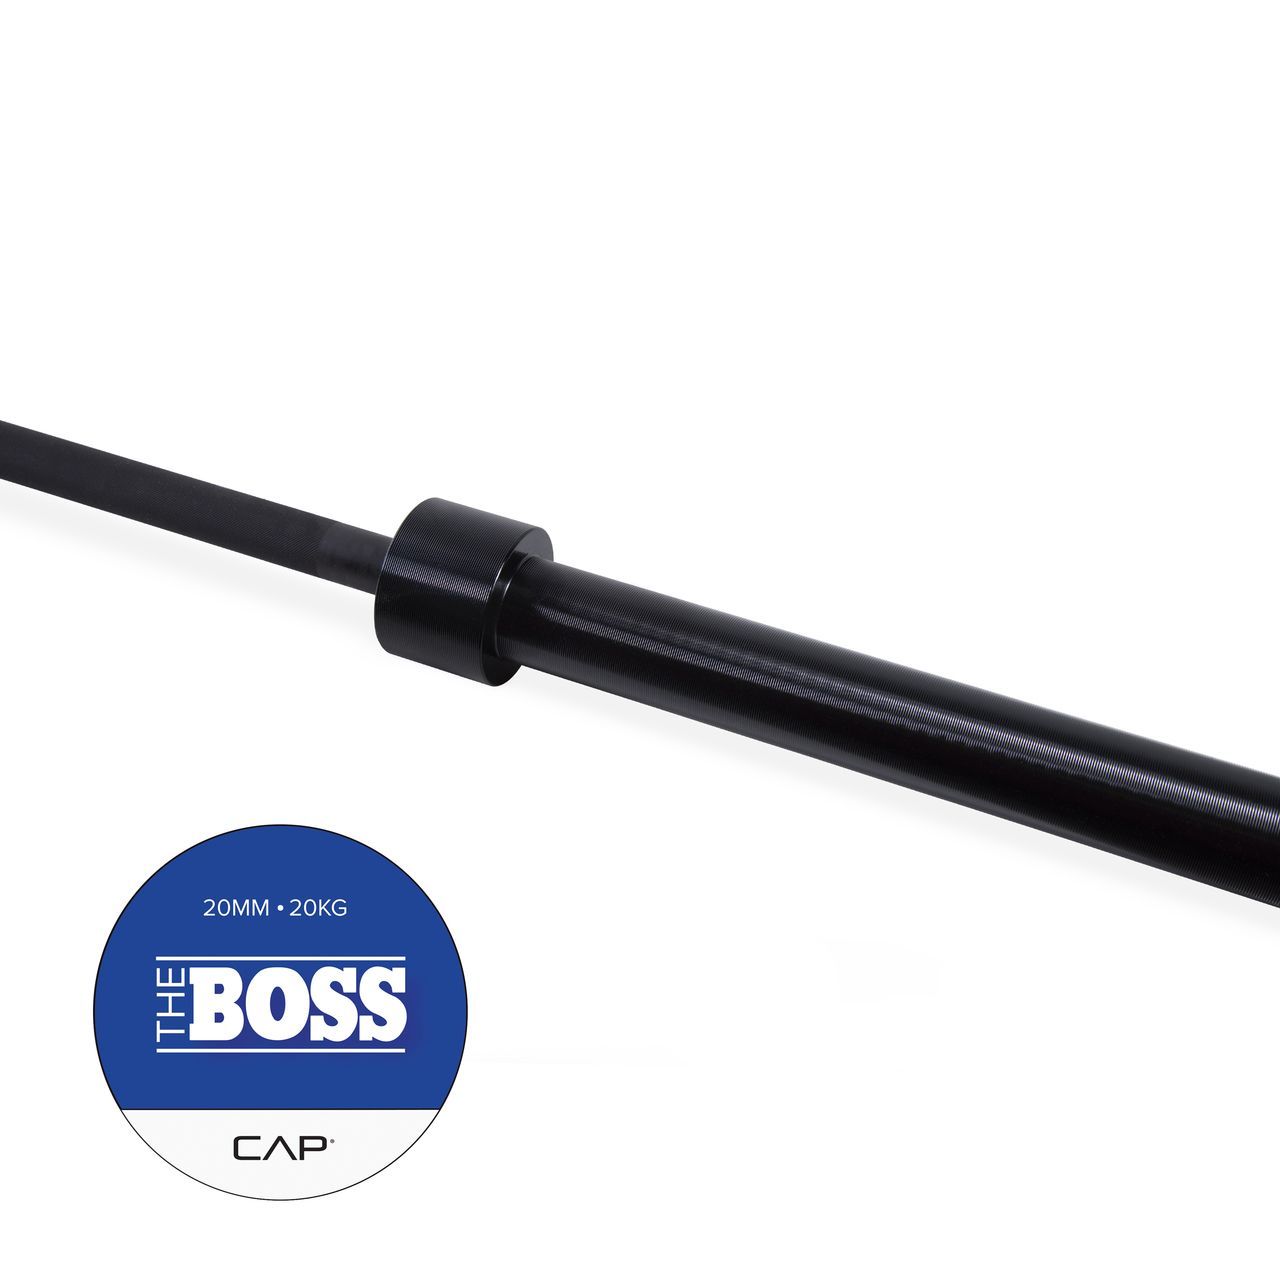 The BOSS Olympic Bar w Center Knurling